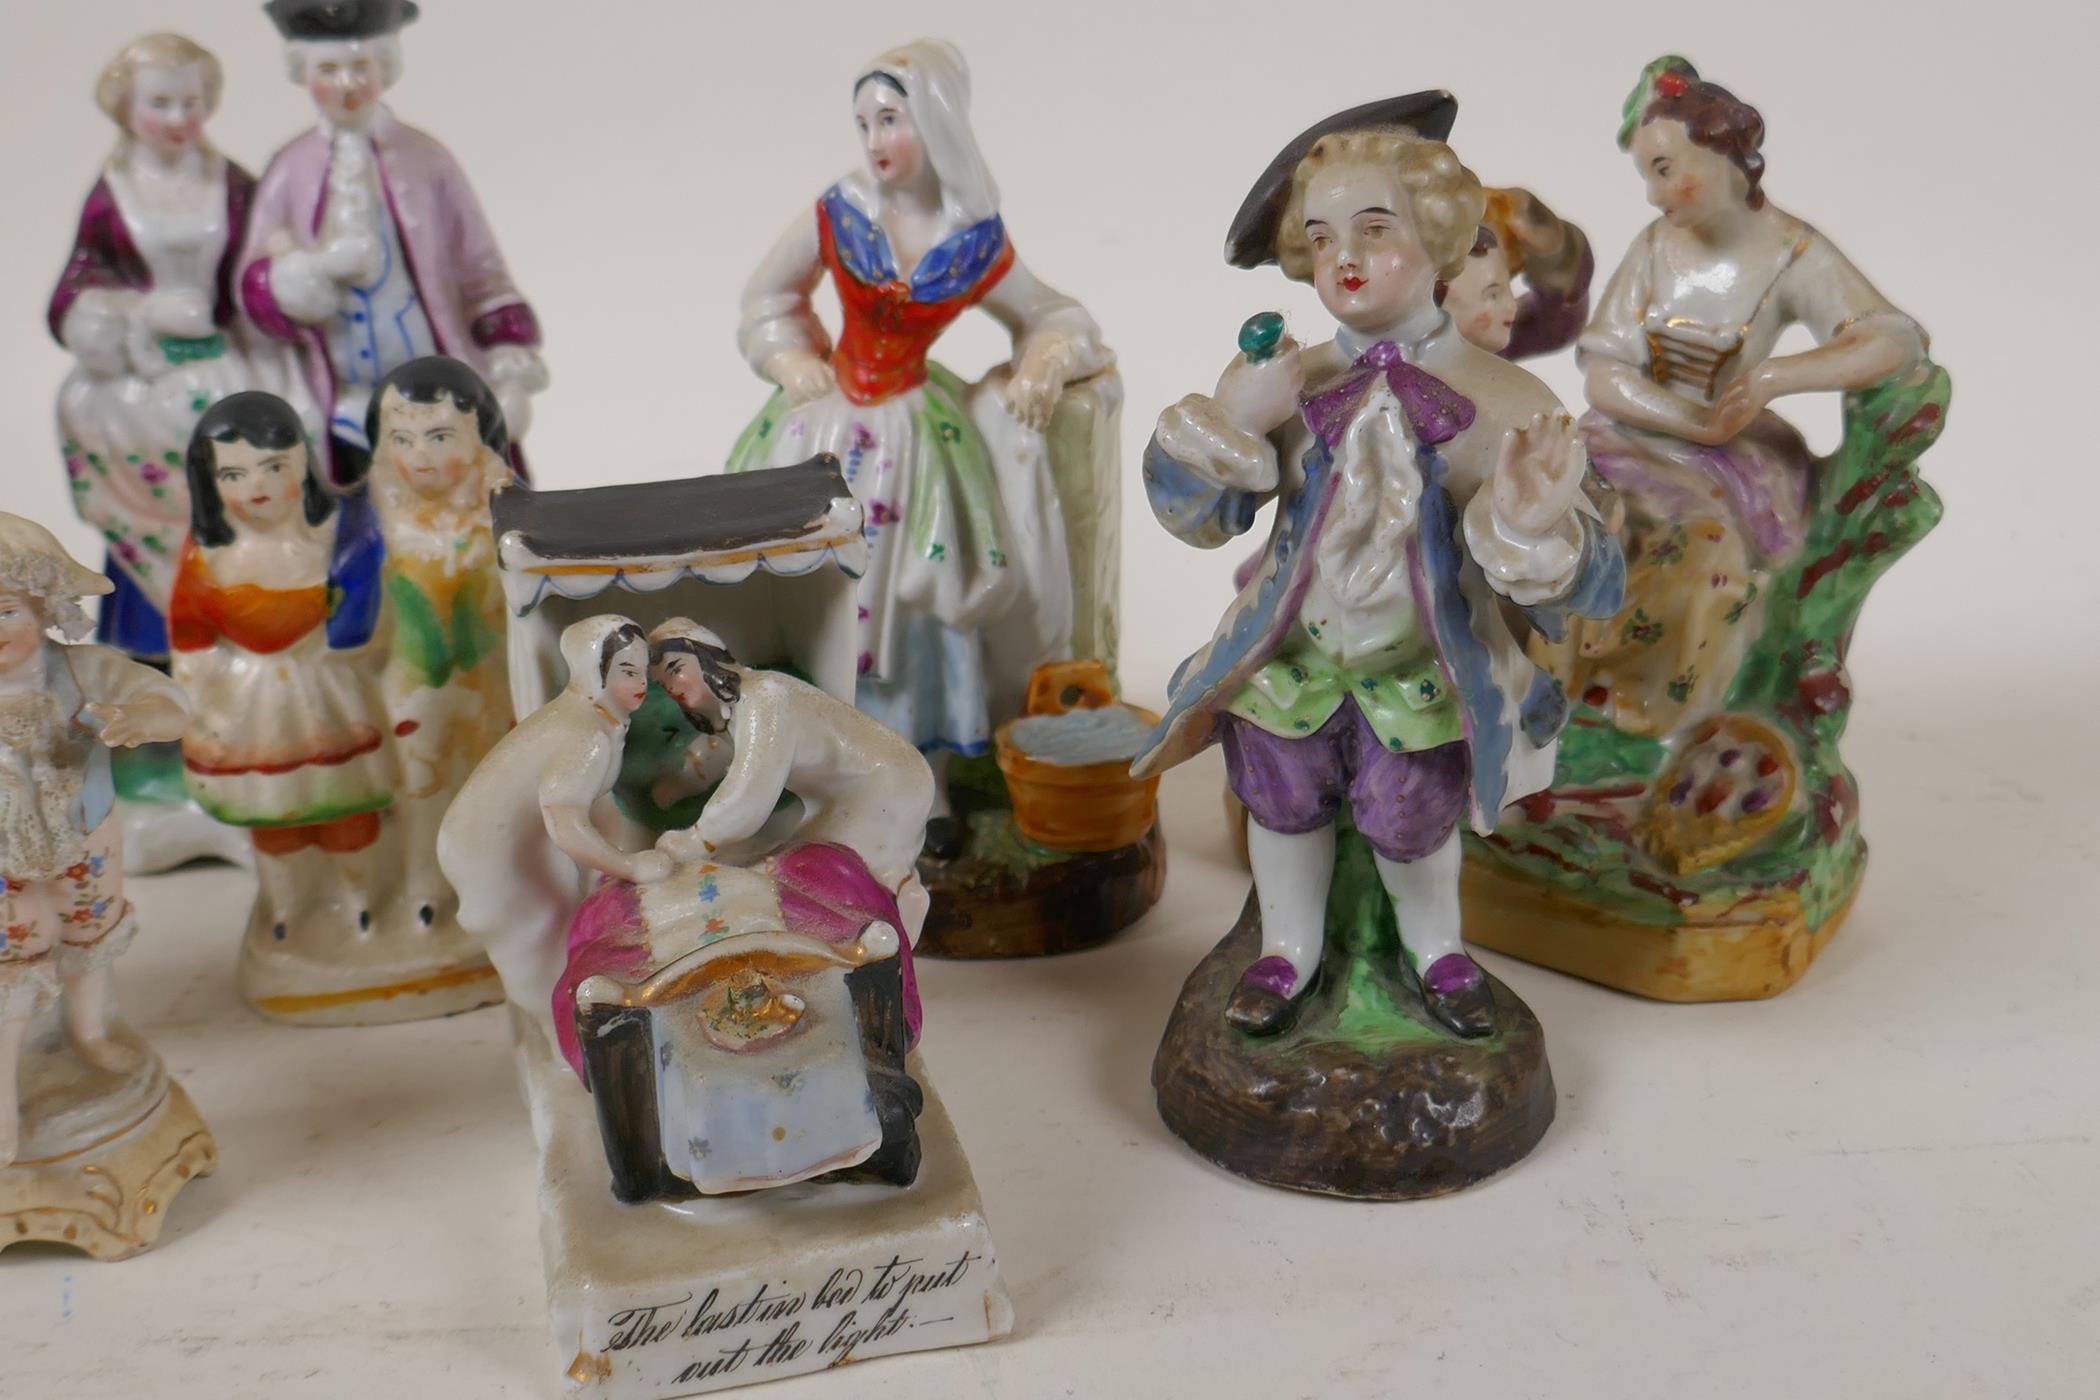 Eleven C19th continental porcelain figurines including groups and a fairing, largest 5½" - Image 5 of 6